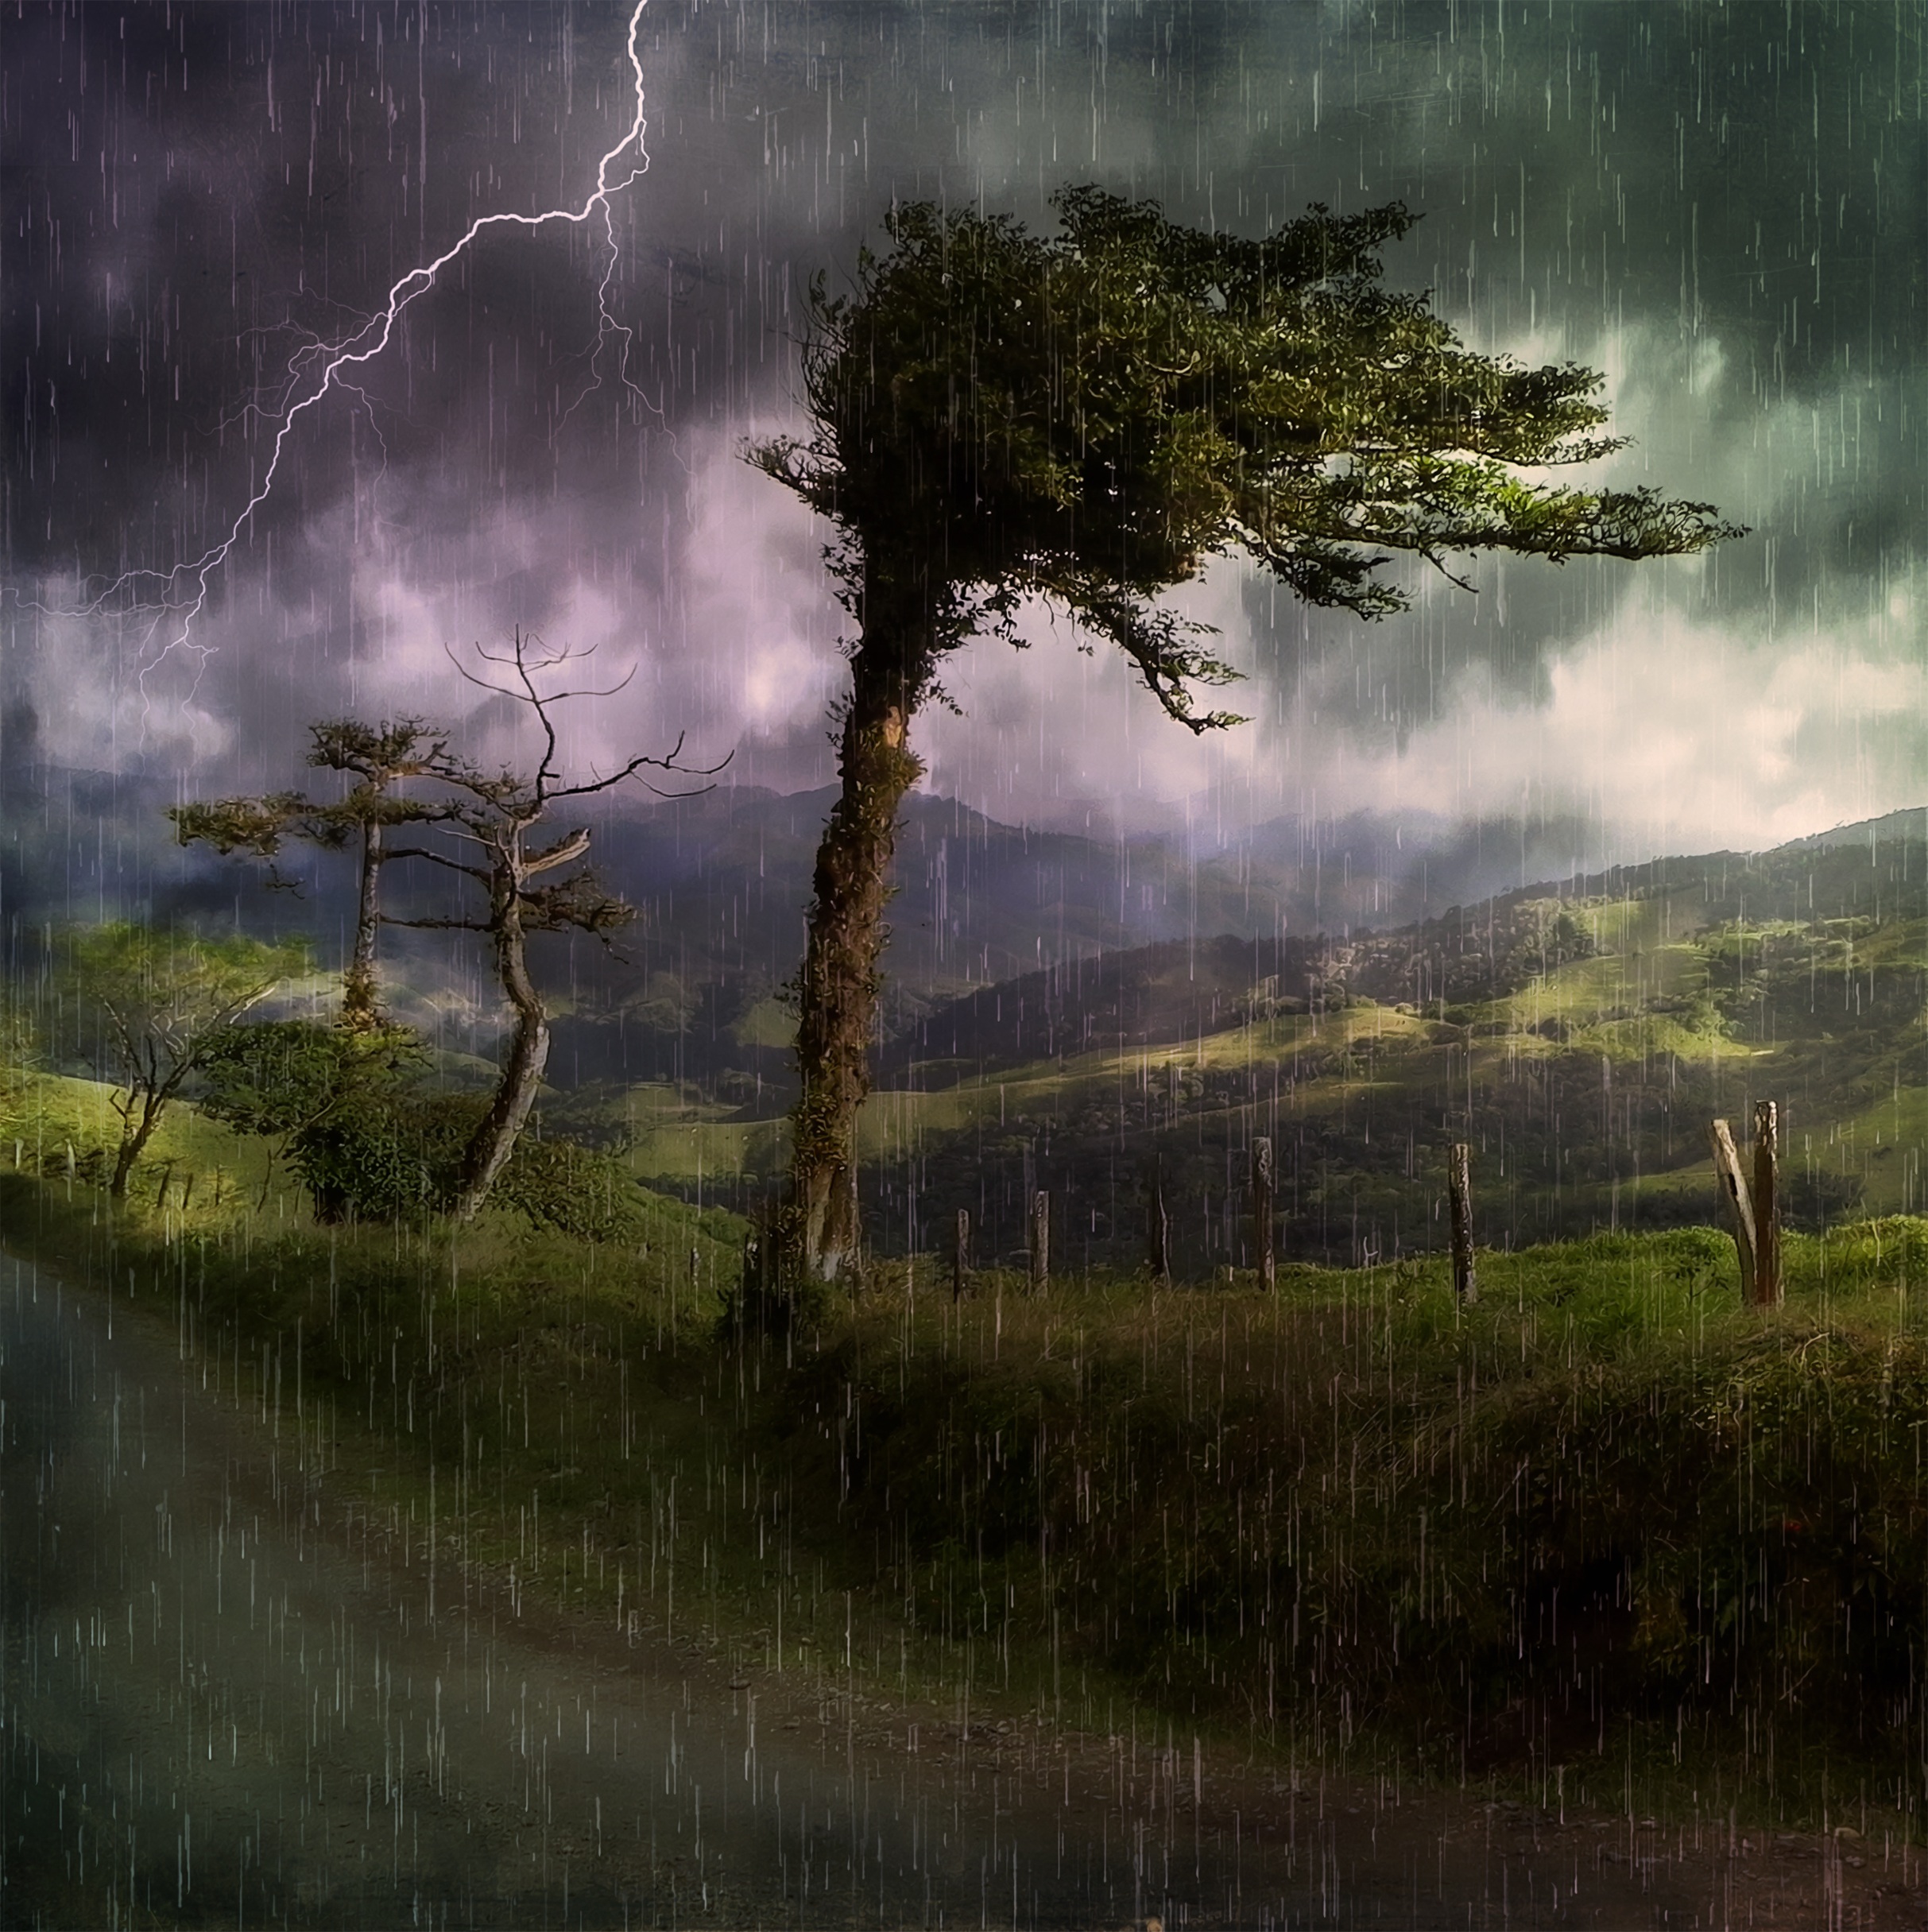 landscape,tree,nature,forest,marsh,swamp,cloud,sky,mist,morning,rain,reflection,weather,storm,painting,trees,flash,clouds,forests,wetland,thunderstorm,habitat,away,reported,digital painting,natural environment,atmospheric phenomenon,woody plant,free Images,landscapes